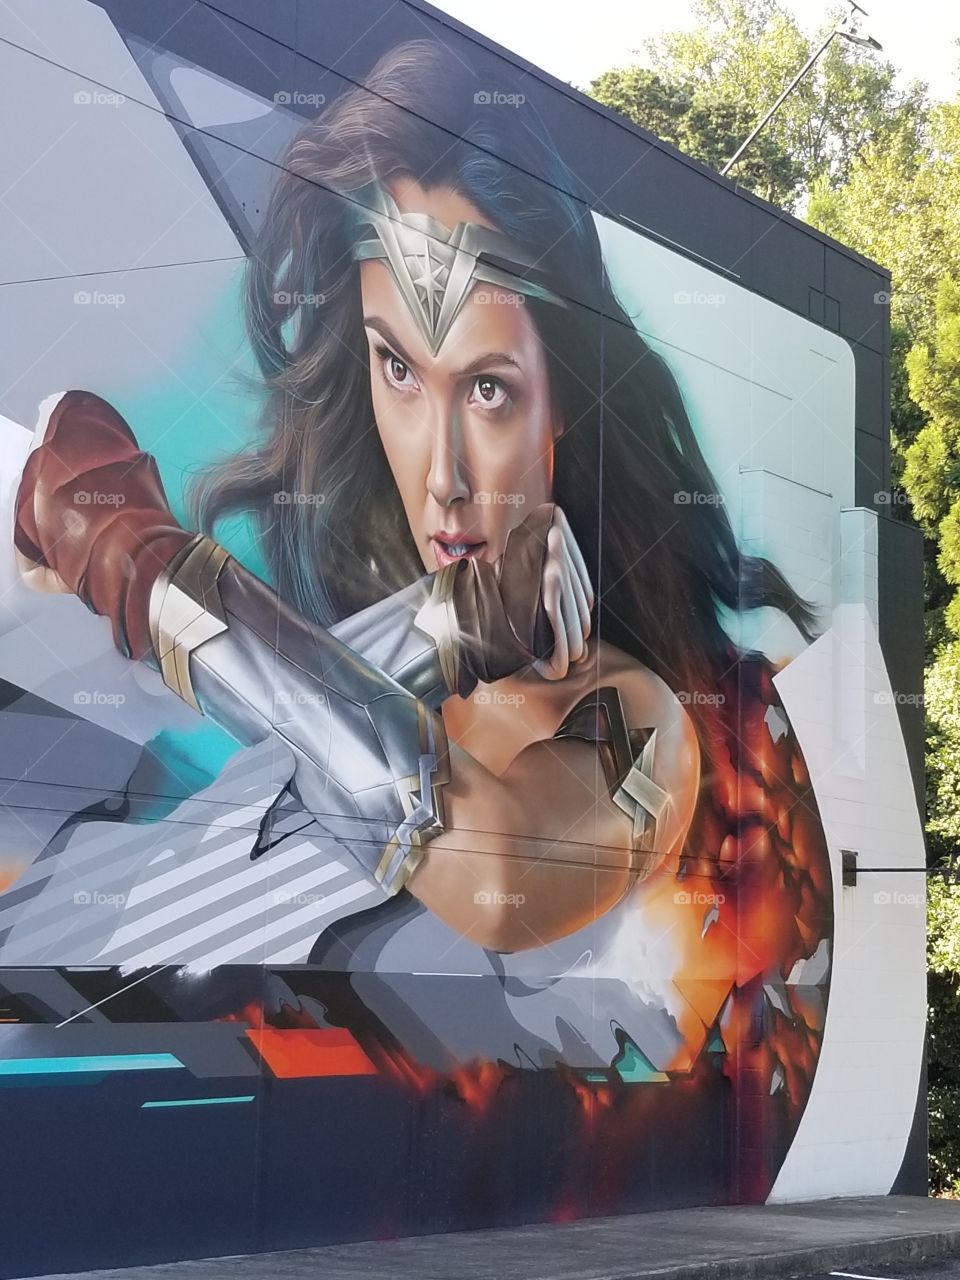 Closeup of wonder woman on building with trees on side on building beautiful.